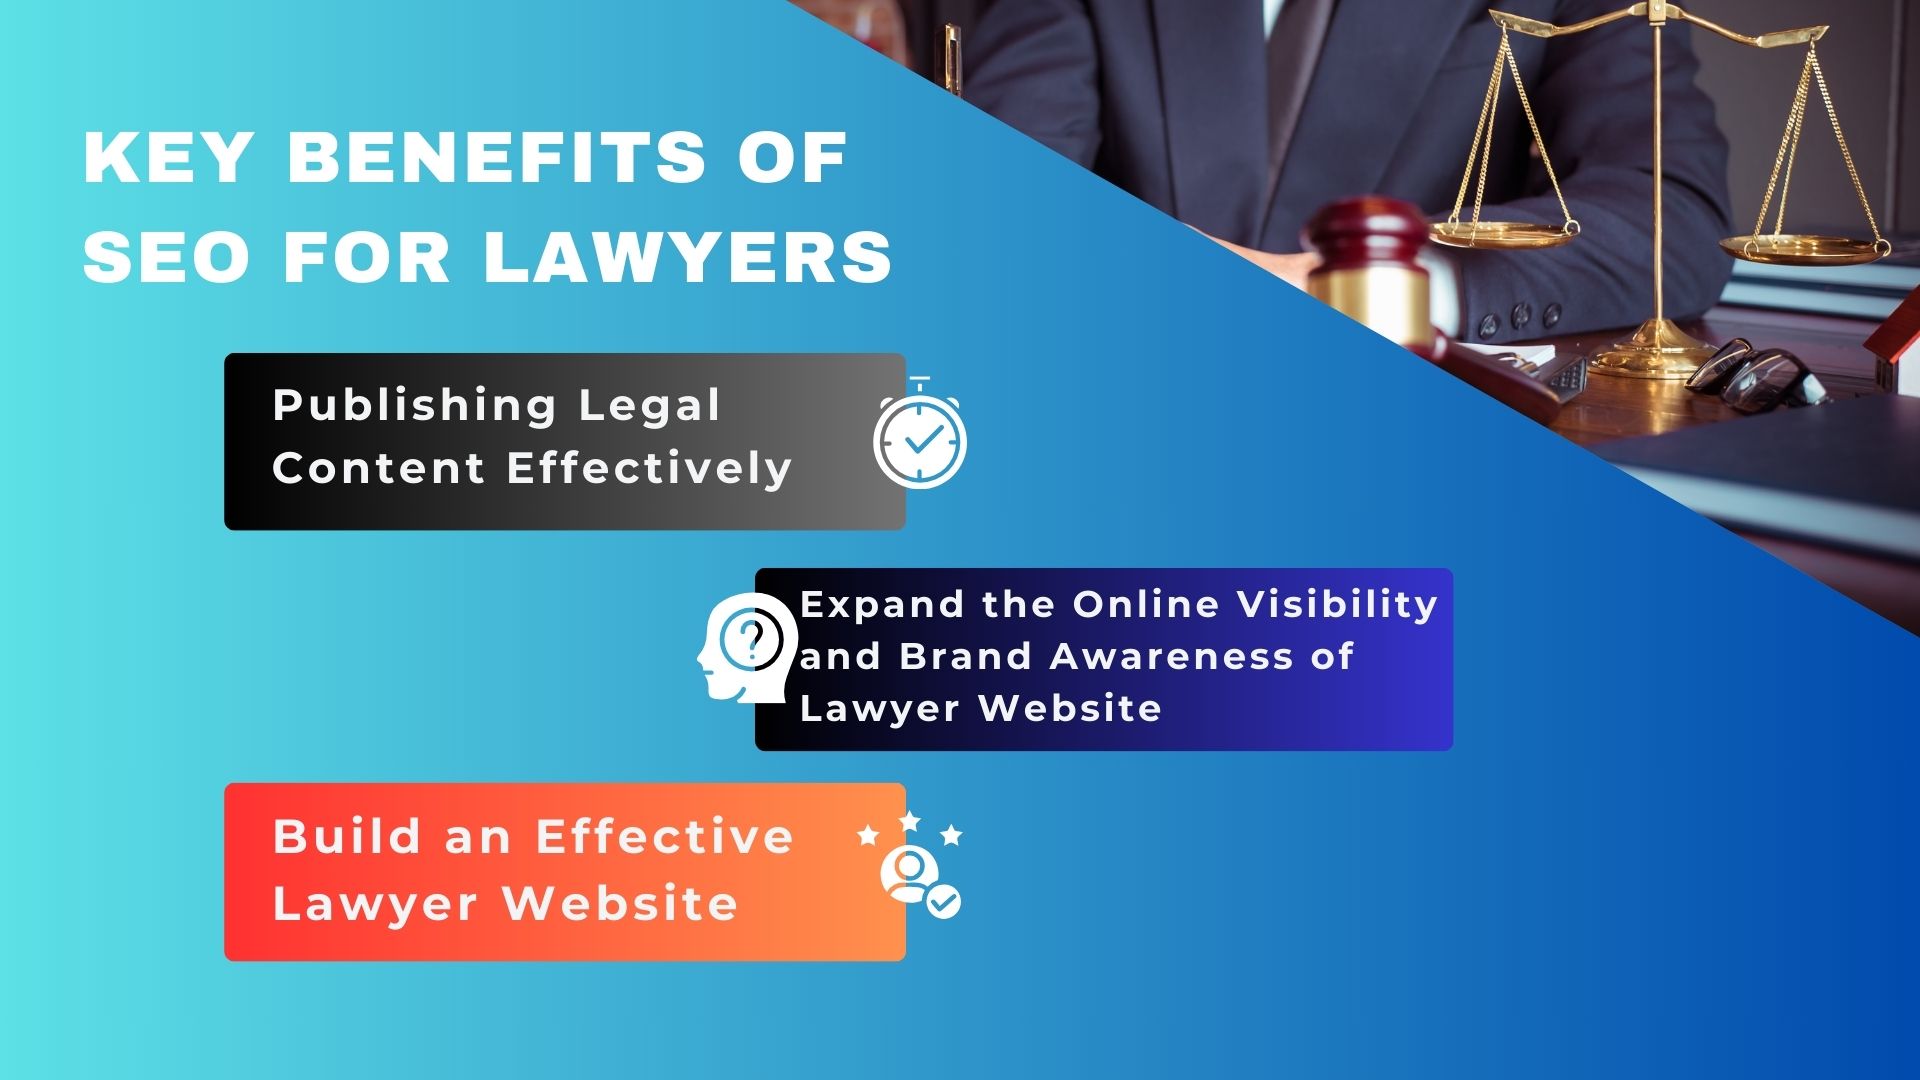 Key Benefits of Seo for Lawyers